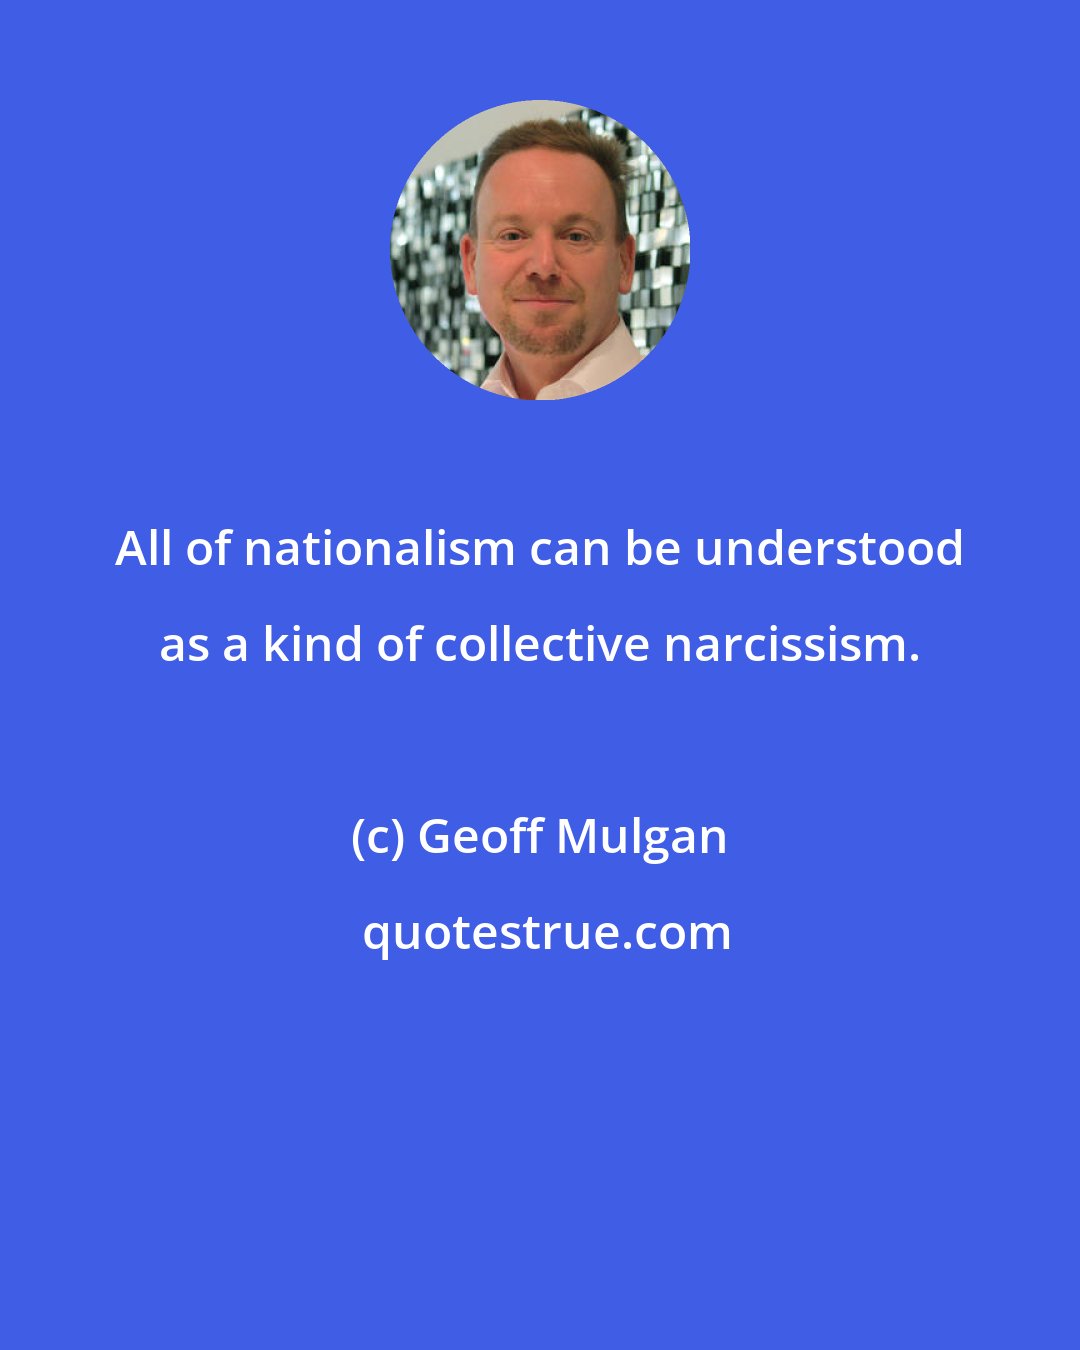 Geoff Mulgan: All of nationalism can be understood as a kind of collective narcissism.